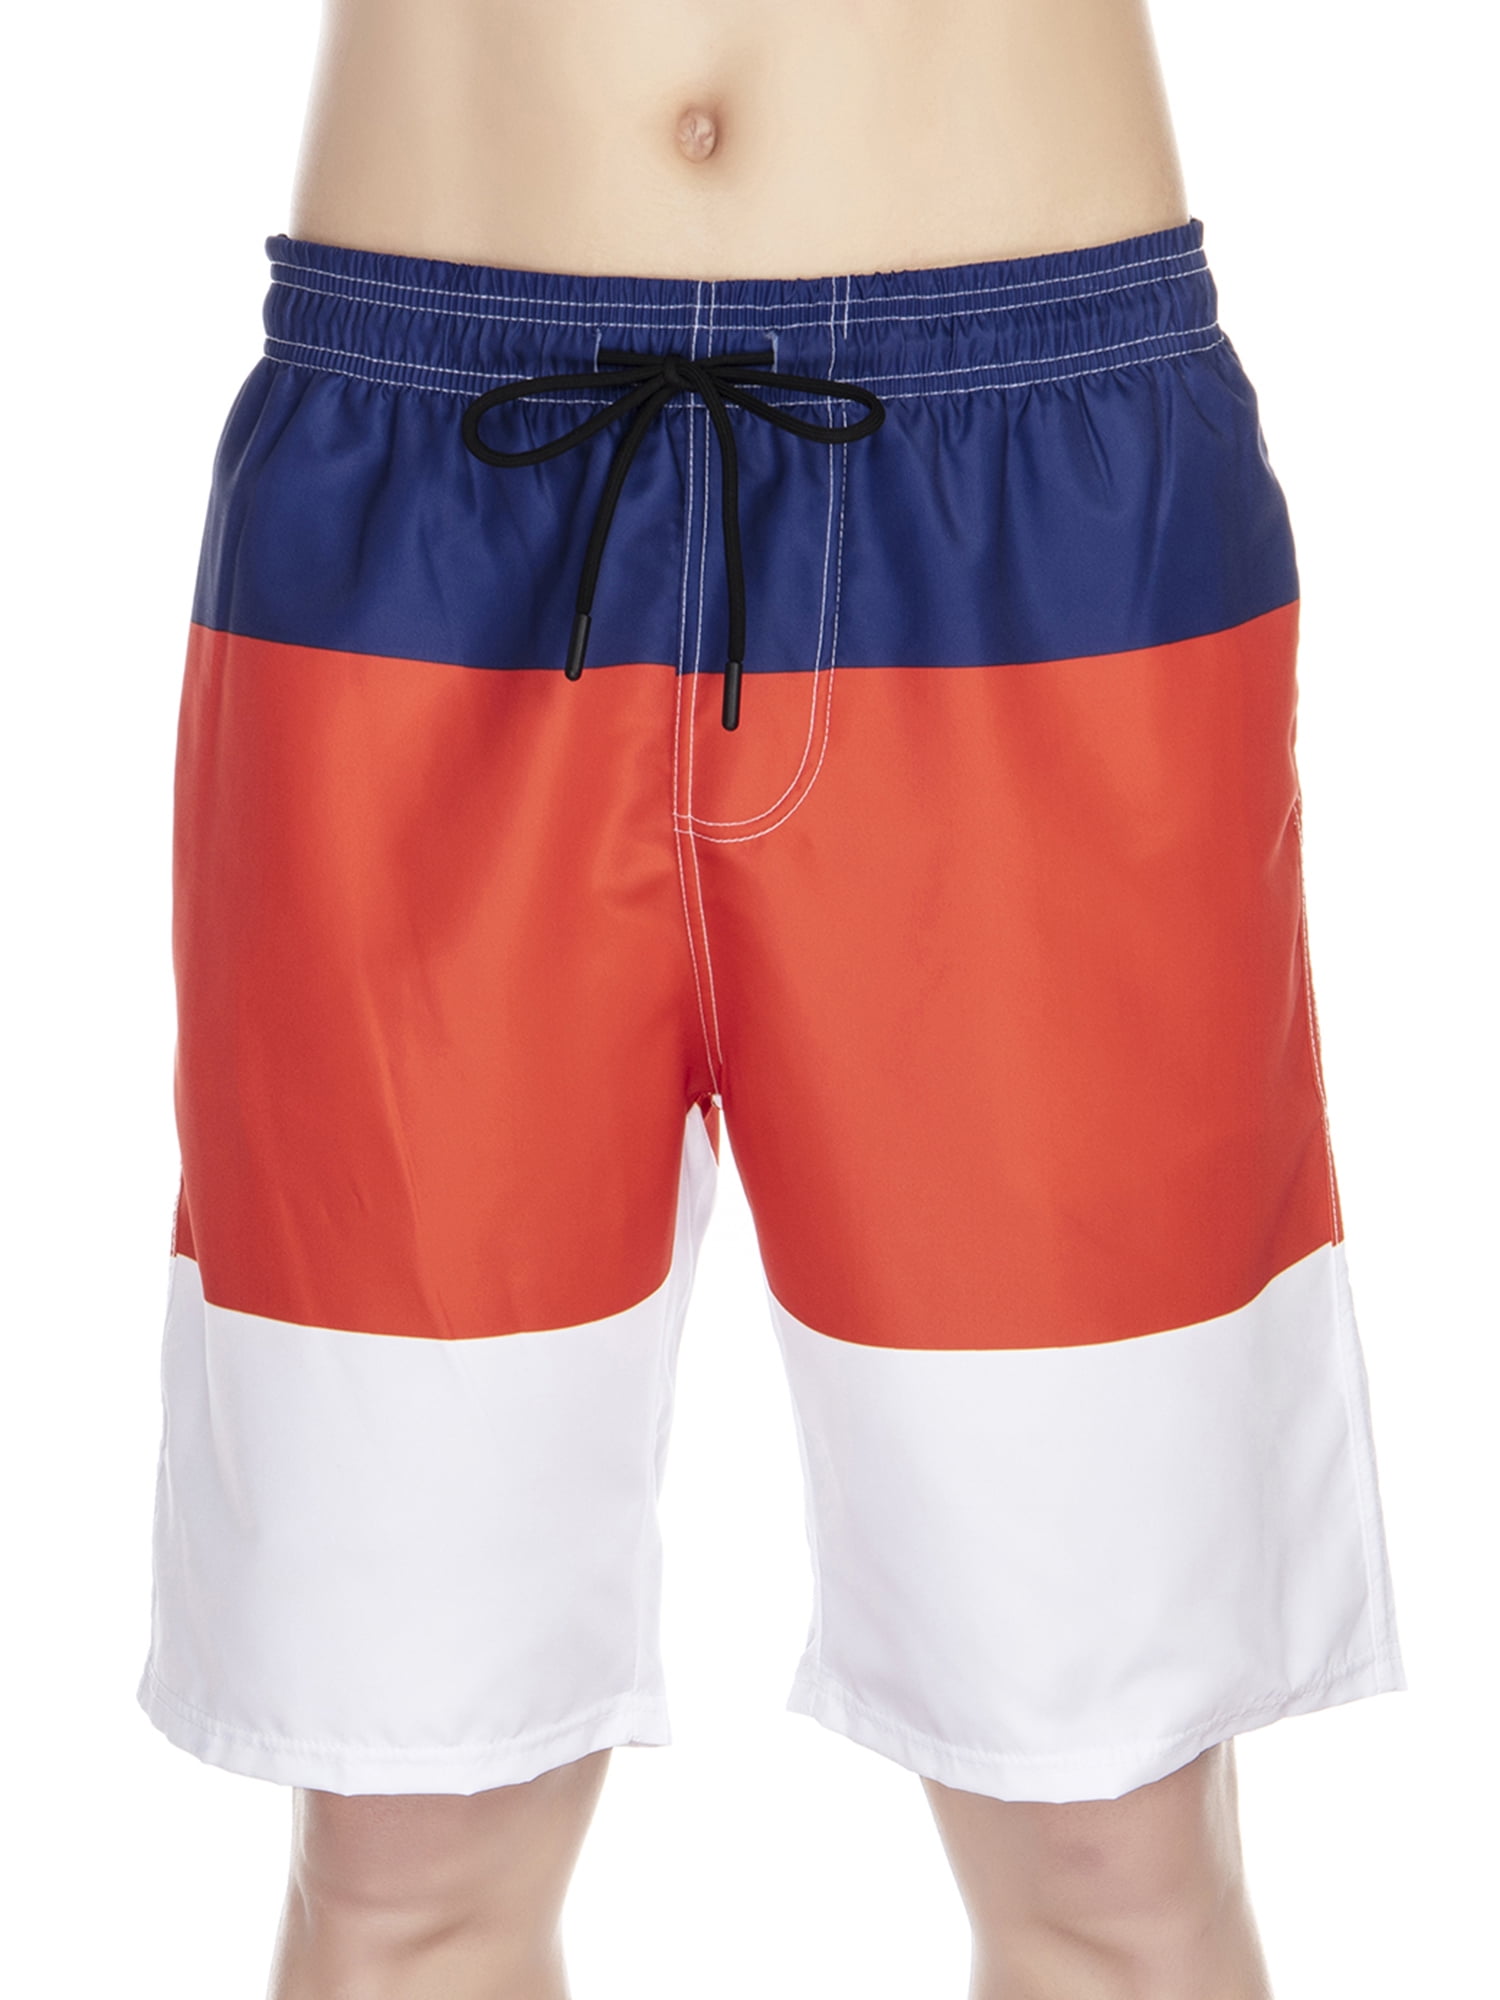 MILANKERR Mens Swim Trunks Mens Bathing Suits with Pockets Quick Dry Board Shorts with Mesh Lining 